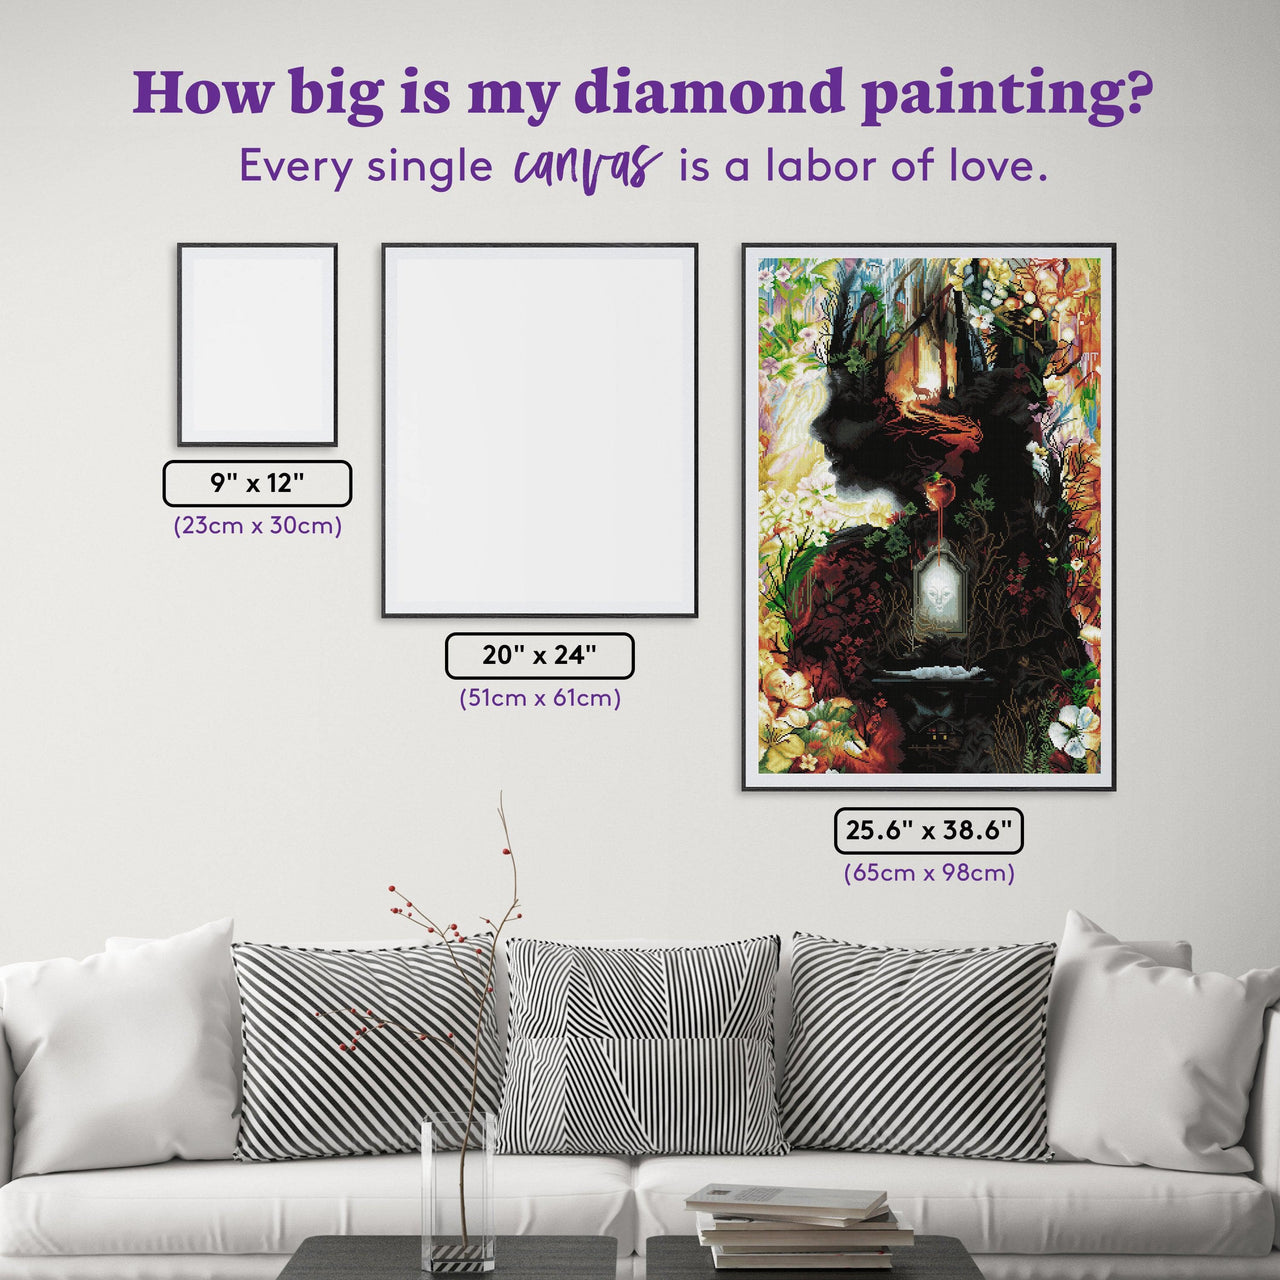 Diamond Painting Dark Snow 25.6" x 38.6" (65cm x 98cm) / Square With 60 Colors including 2 ABs and 2 Fairy Dust Diamonds / 102,573